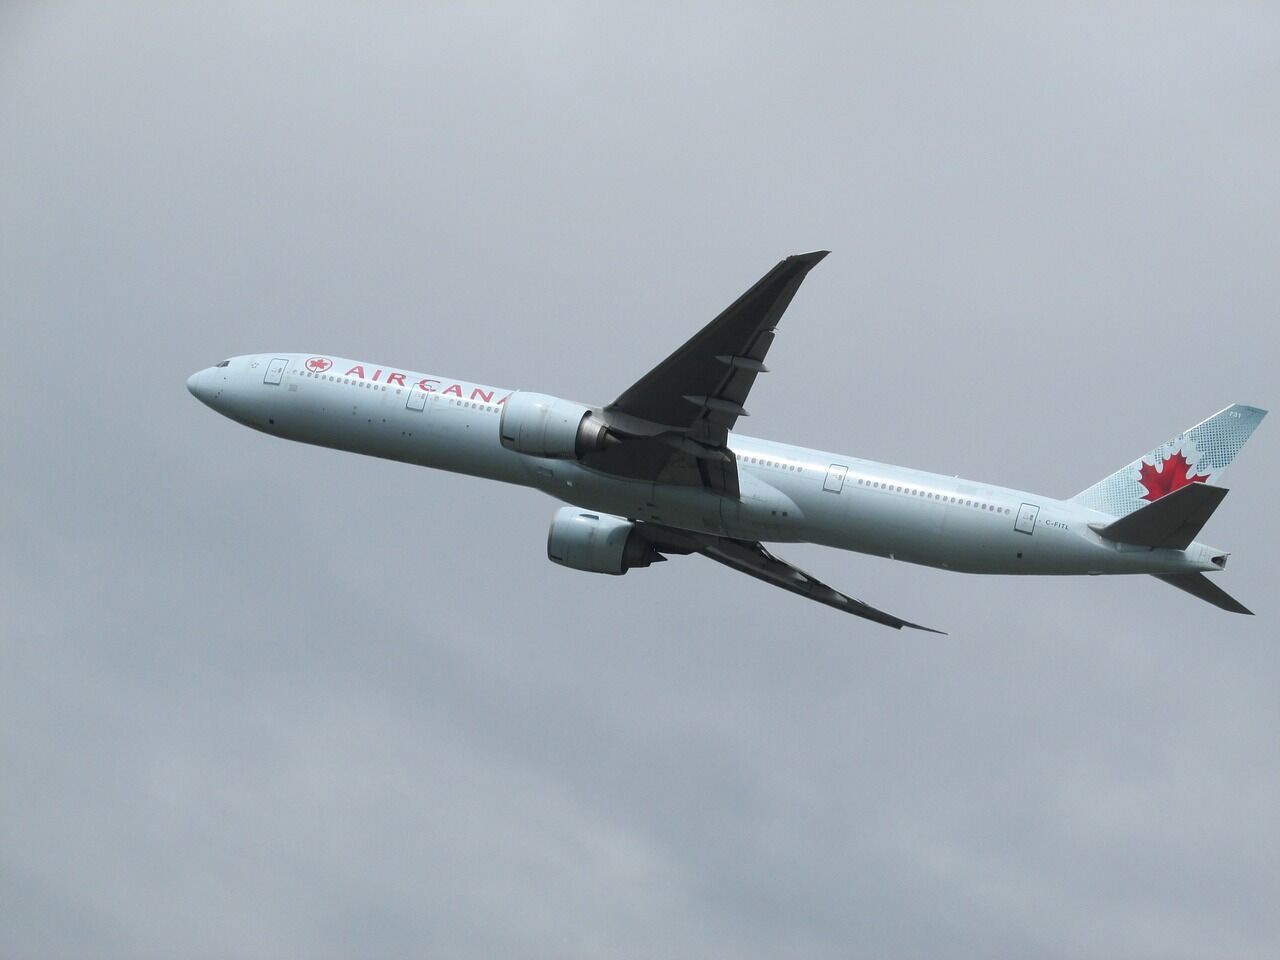 A 16-year-old passenger assaulted a family member on board an Air Canada flight, forcing the crew to make an unscheduled landing